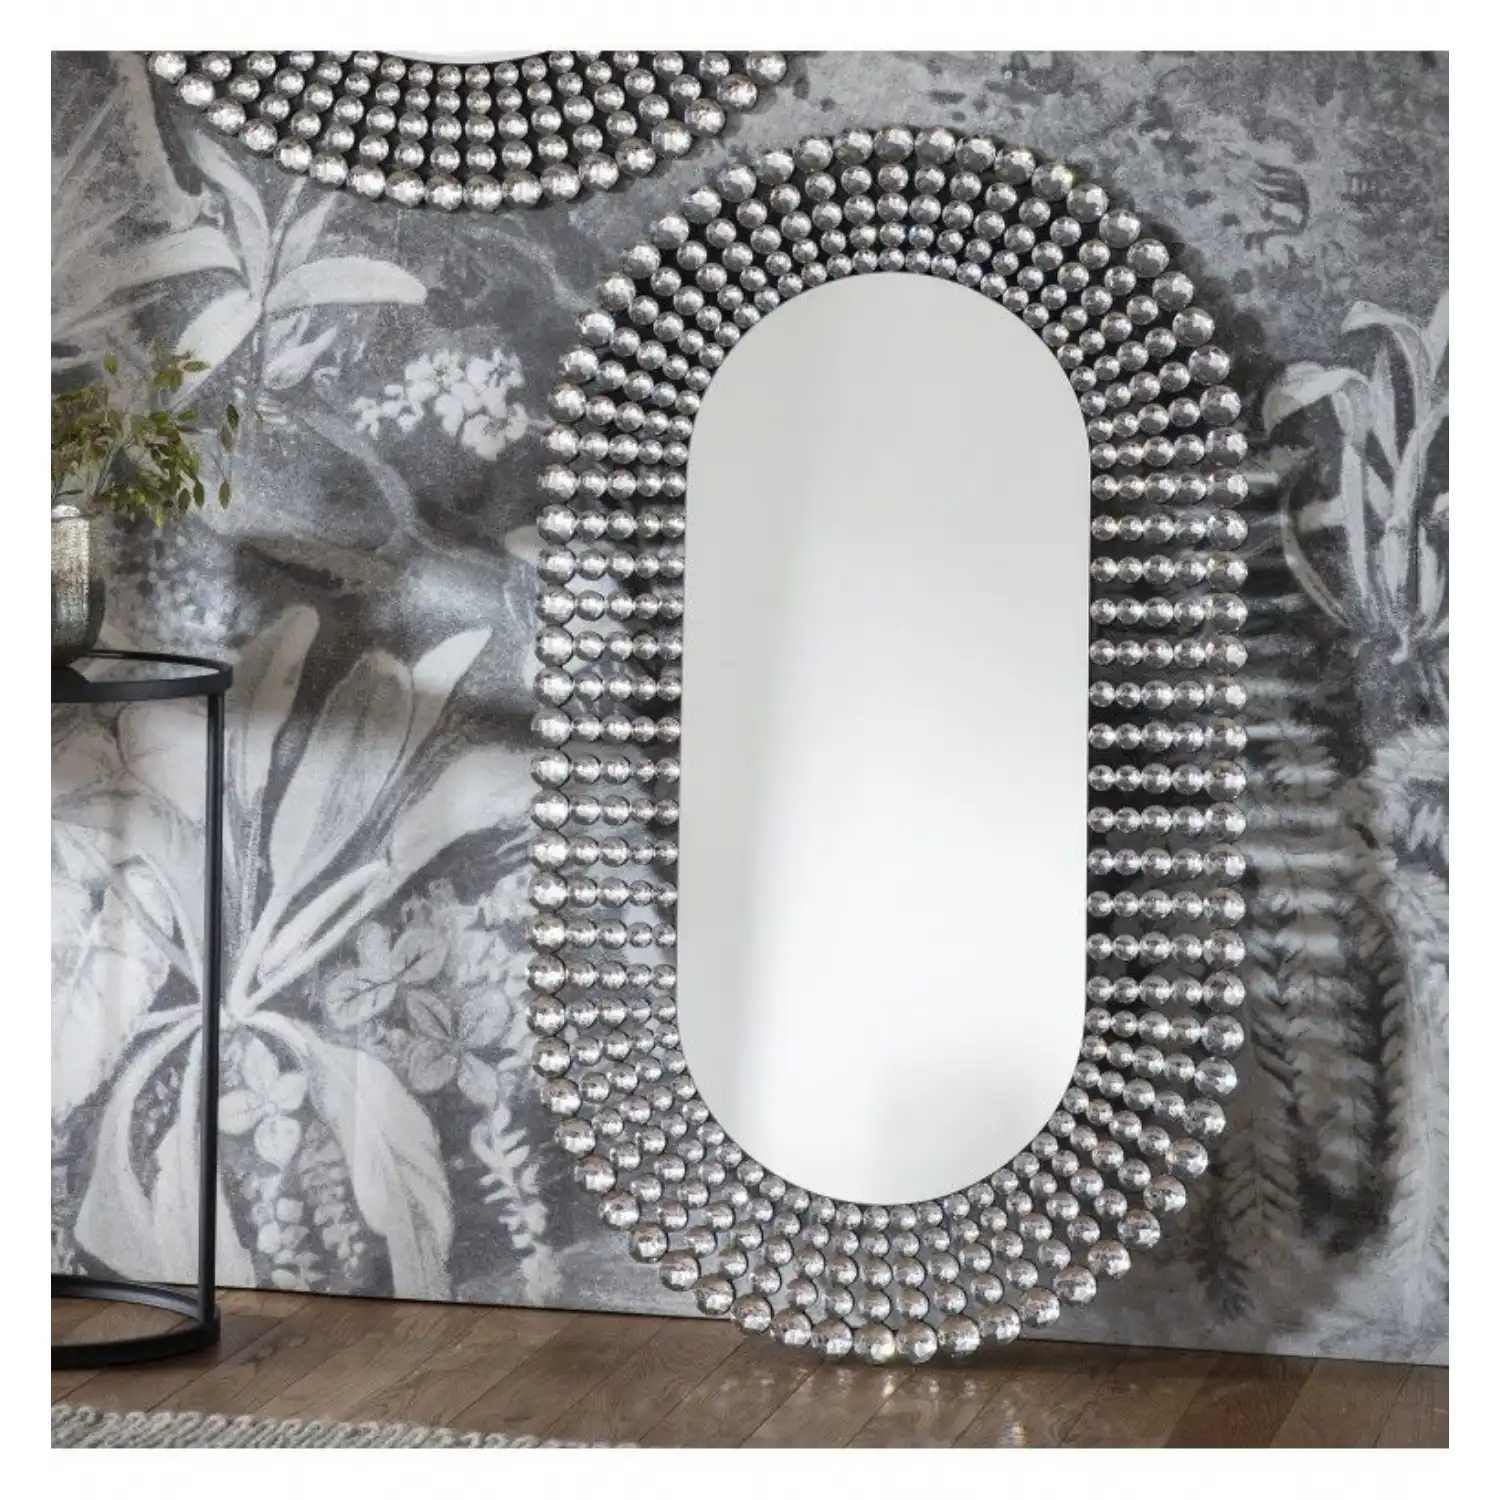 Large Crystal Glass Beaded Oval Wall Mirror